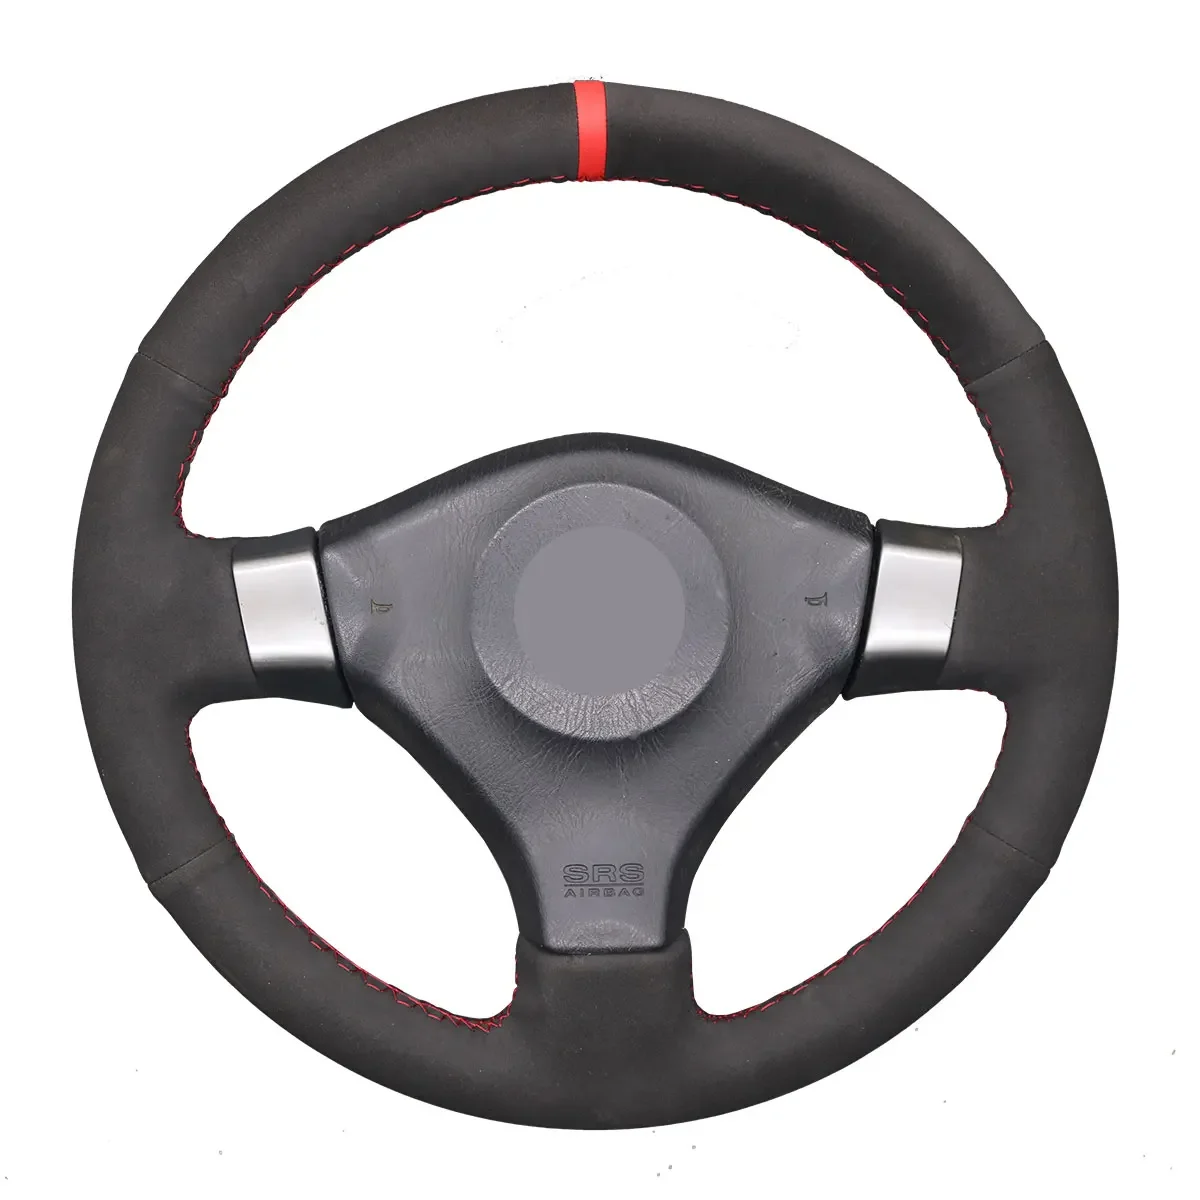 

Hand-stitched Black Suede Car Steering Wheel Cover for Nissan 200SX S15 Silvia Skyline R34 GTR GT-R 1998 1999 2000 2001 2002